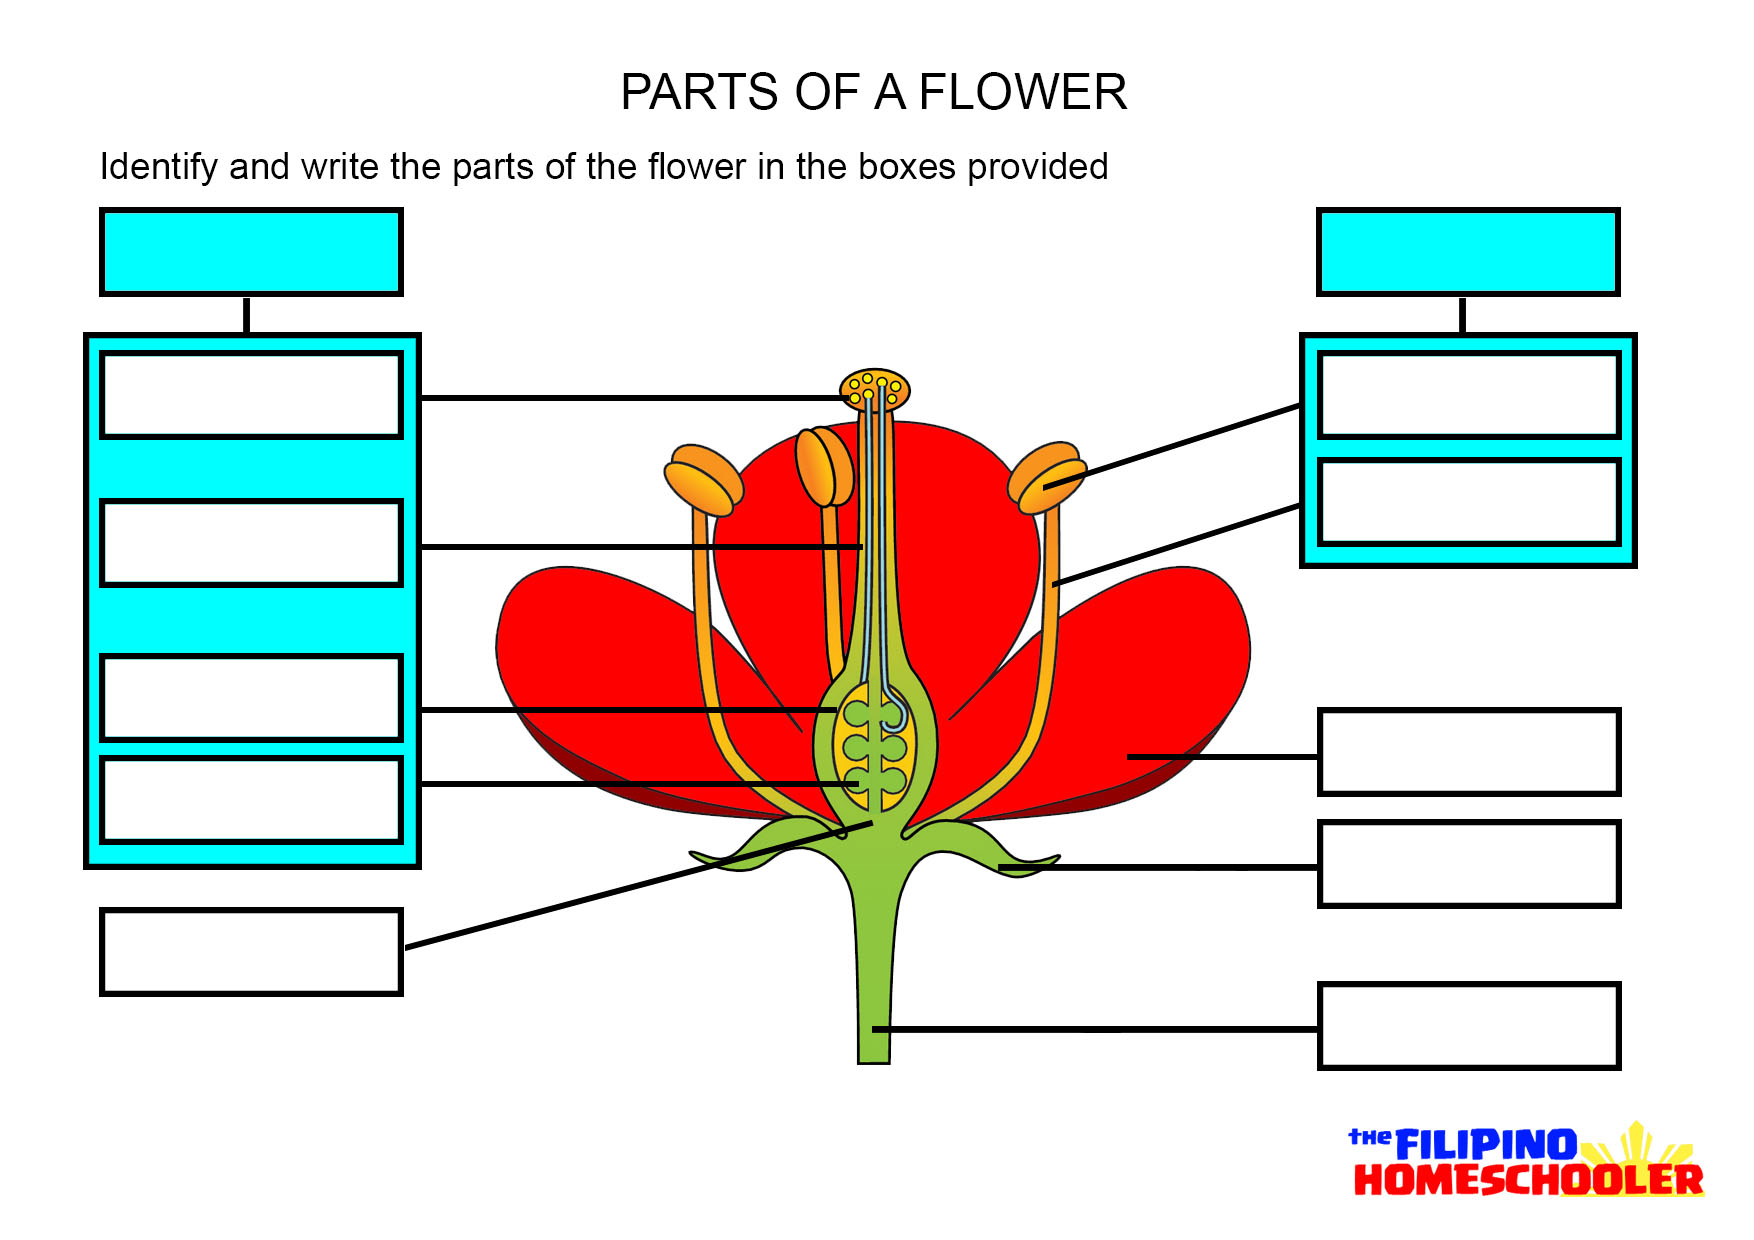 Parts Of The Flower Worksheet - Pichaglobal